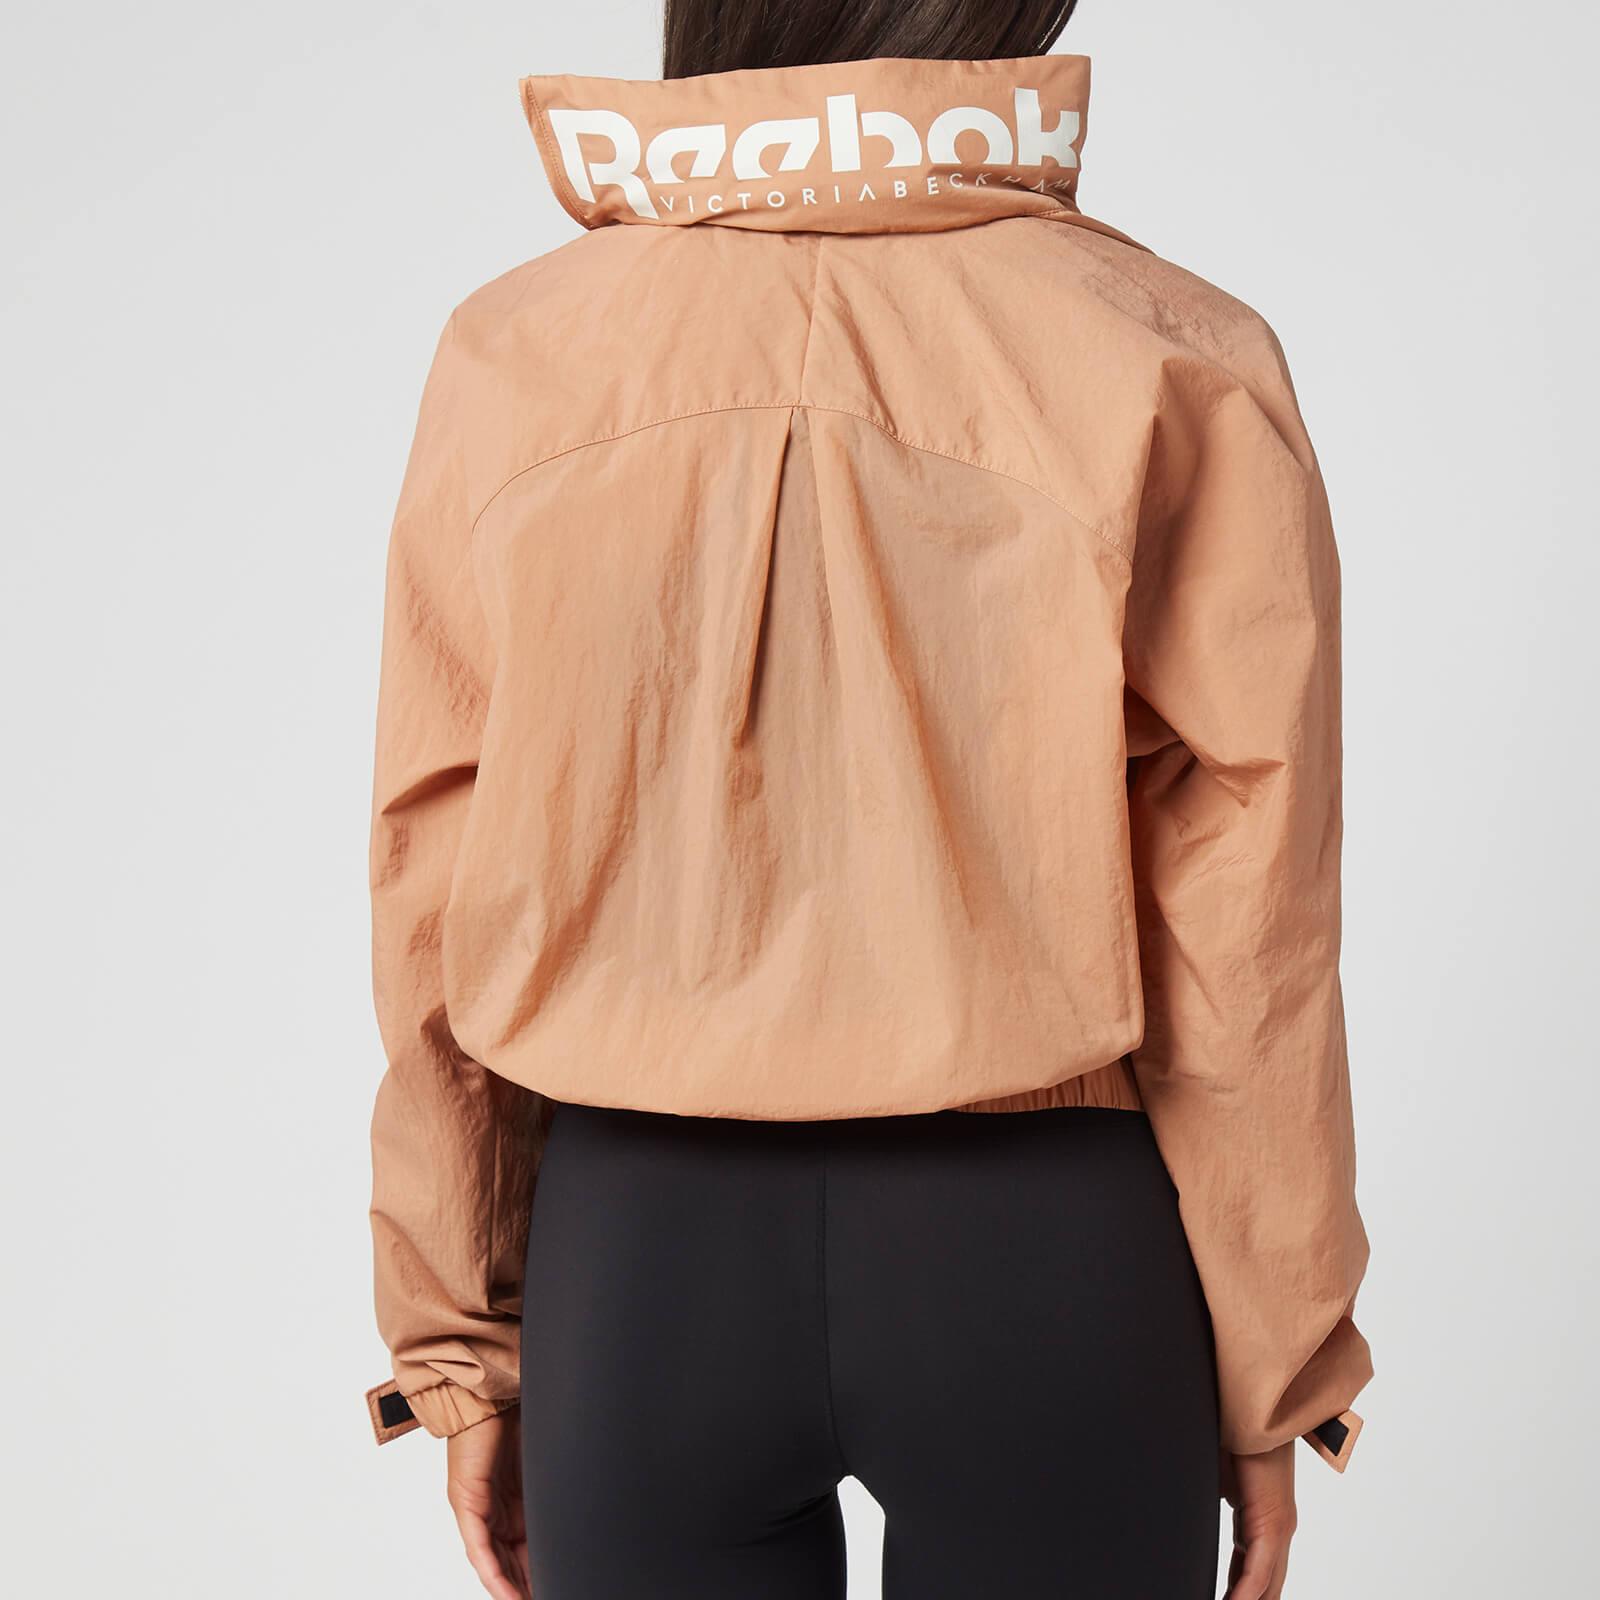 Reebok X Victoria Beckham Synthetic Woven Crew Jacket in Beige (Natural) -  Lyst